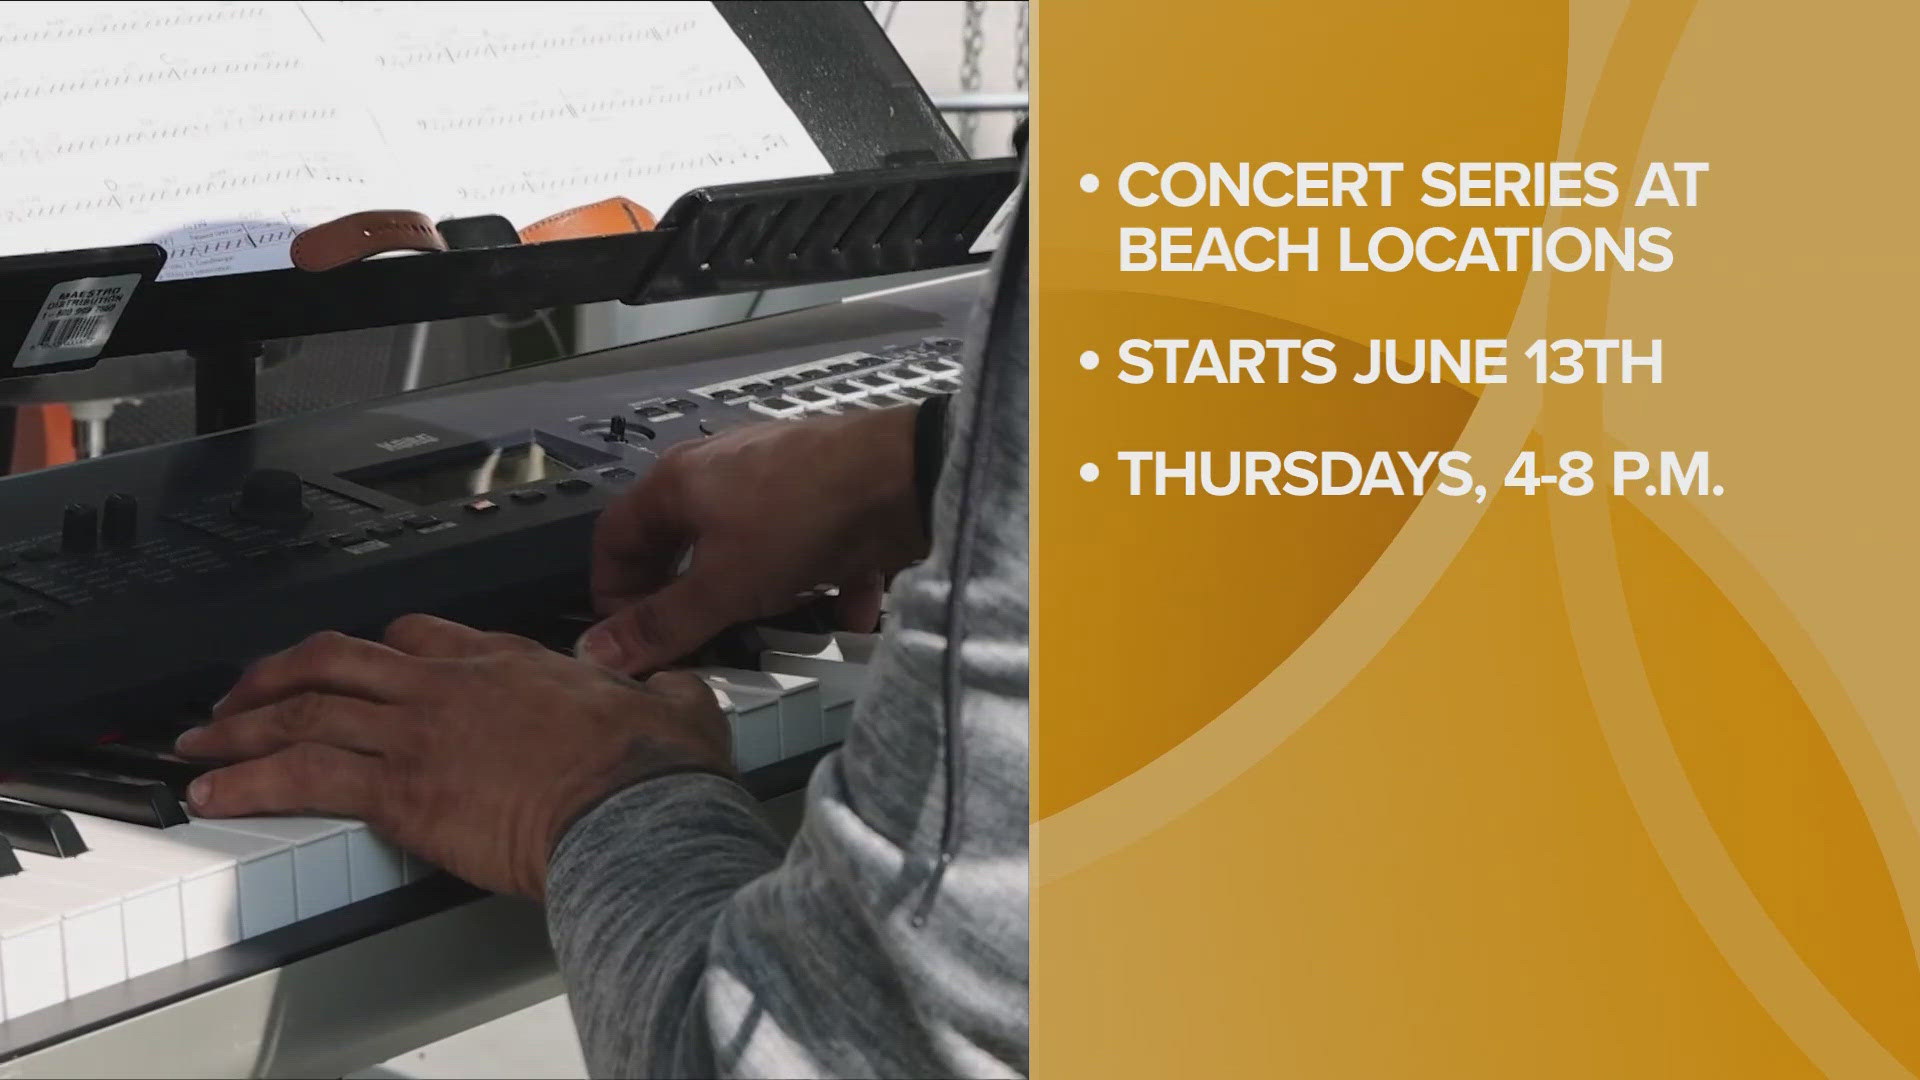 Cleveland Metroparks has announced the return of the Summer Concert Series, which will begin on Thursday, June 13.